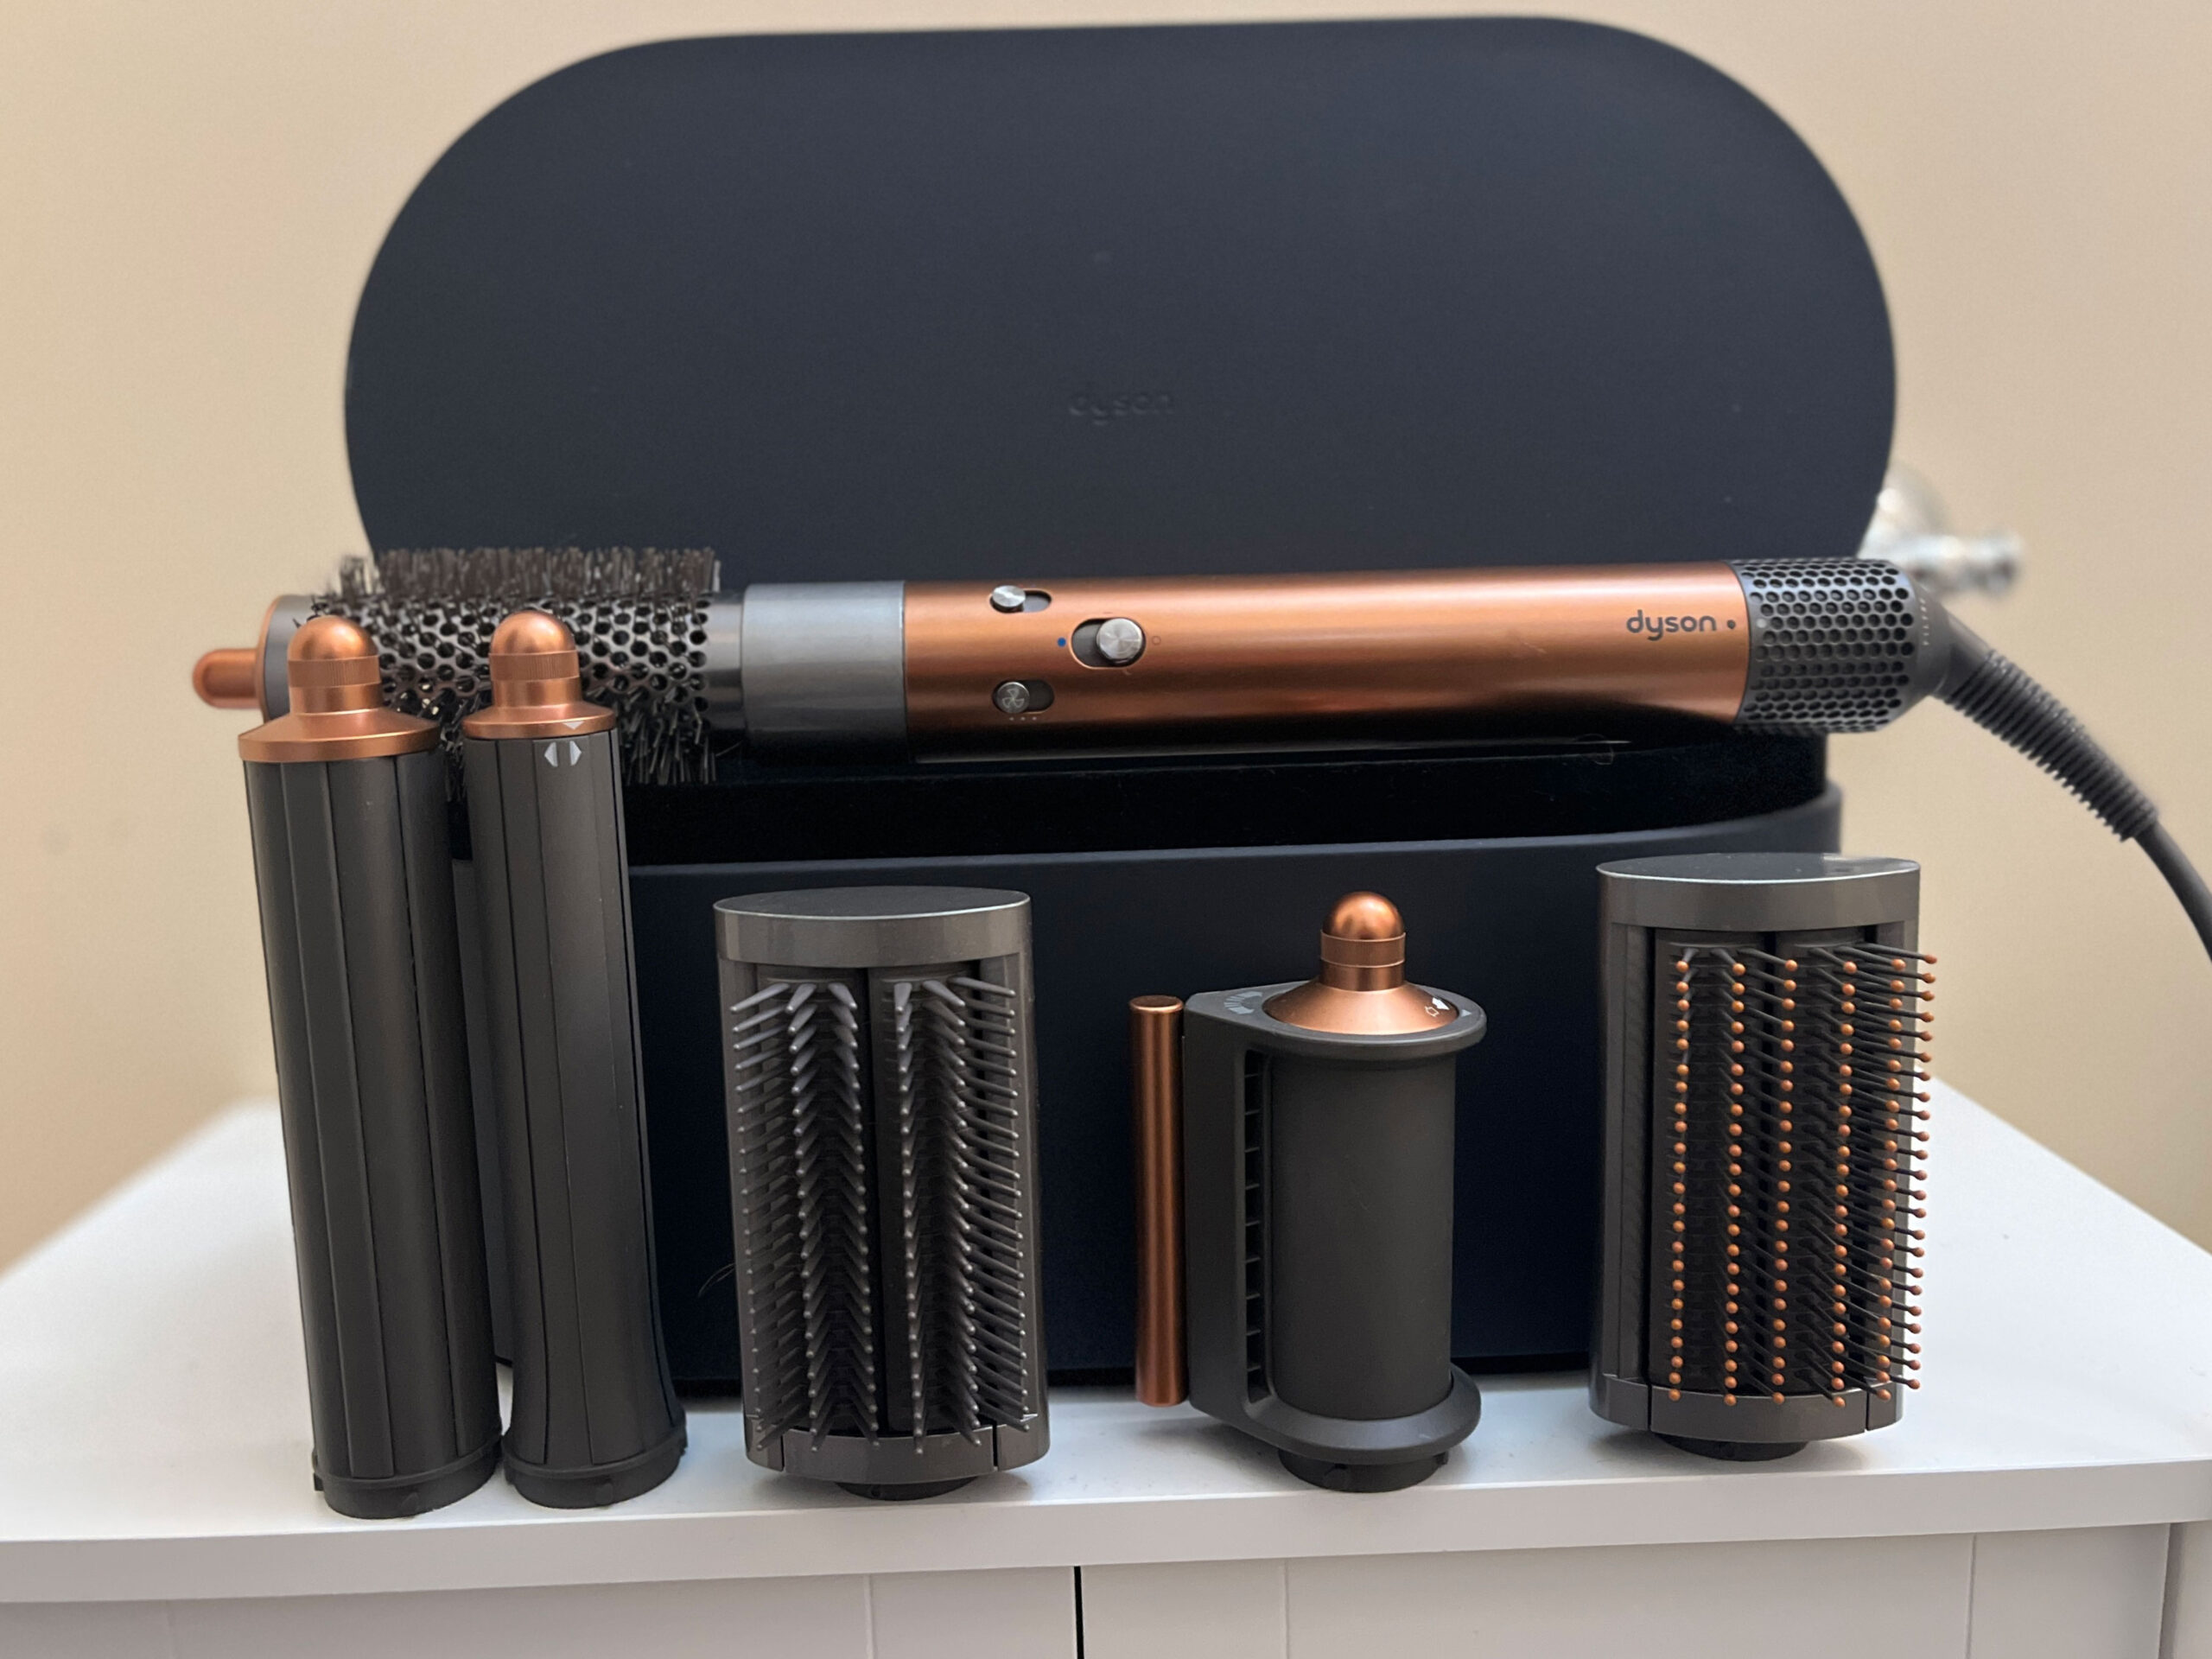 A copper and silver Dyson Airwrap displayed on a white shelf against a yellow wall